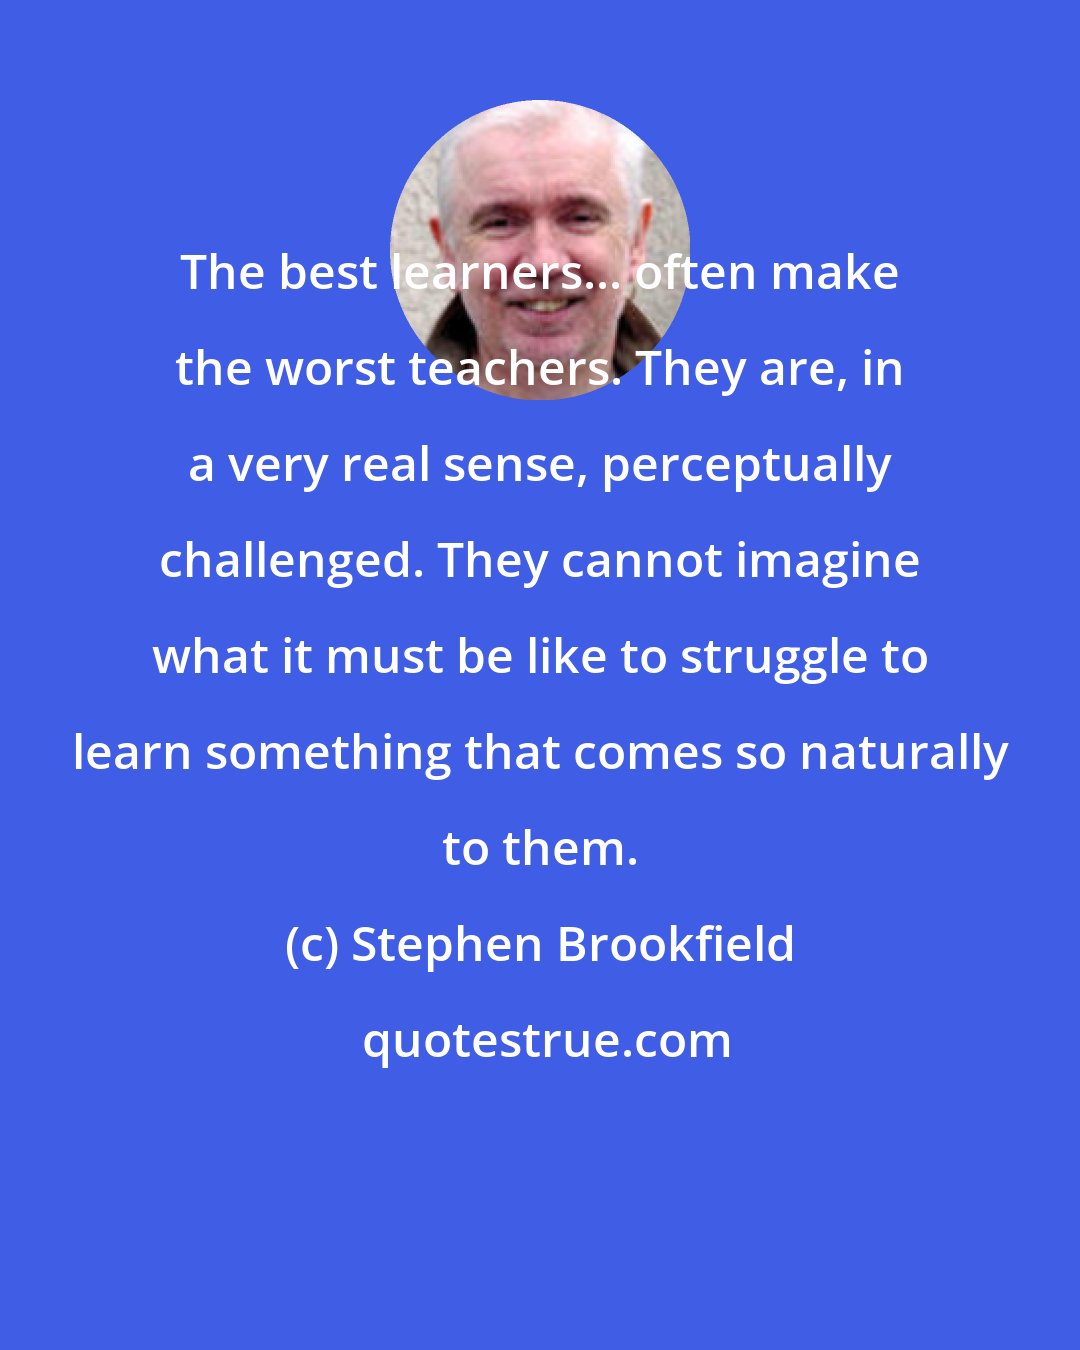 Stephen Brookfield: The best learners... often make the worst teachers. They are, in a very real sense, perceptually challenged. They cannot imagine what it must be like to struggle to learn something that comes so naturally to them.